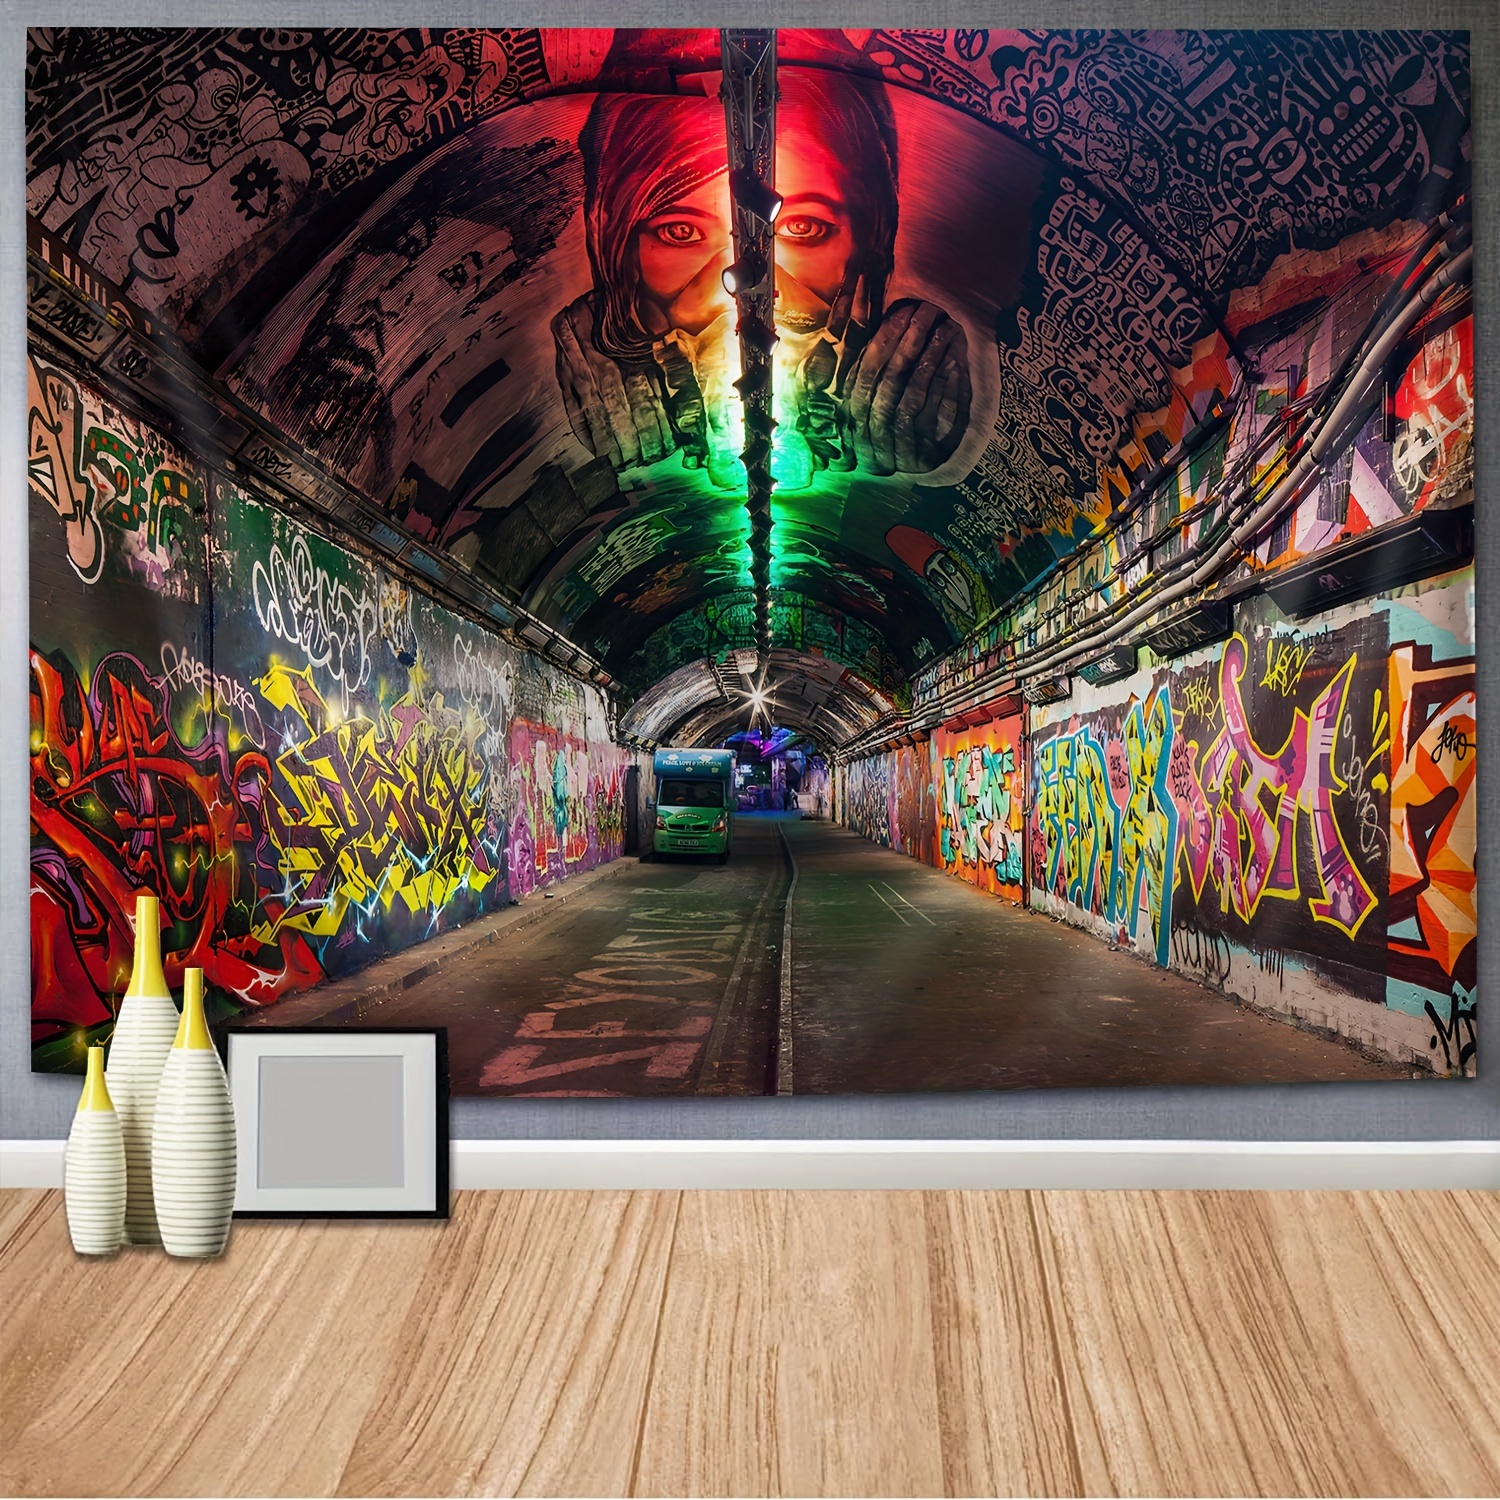 

1pc Street Graffiti Pattern Tapestry, Polyester Tapestry, Wall Hanging For Living Room Bedroom Office, Home Decor Room Decor Party Decor, With Free Installation Package